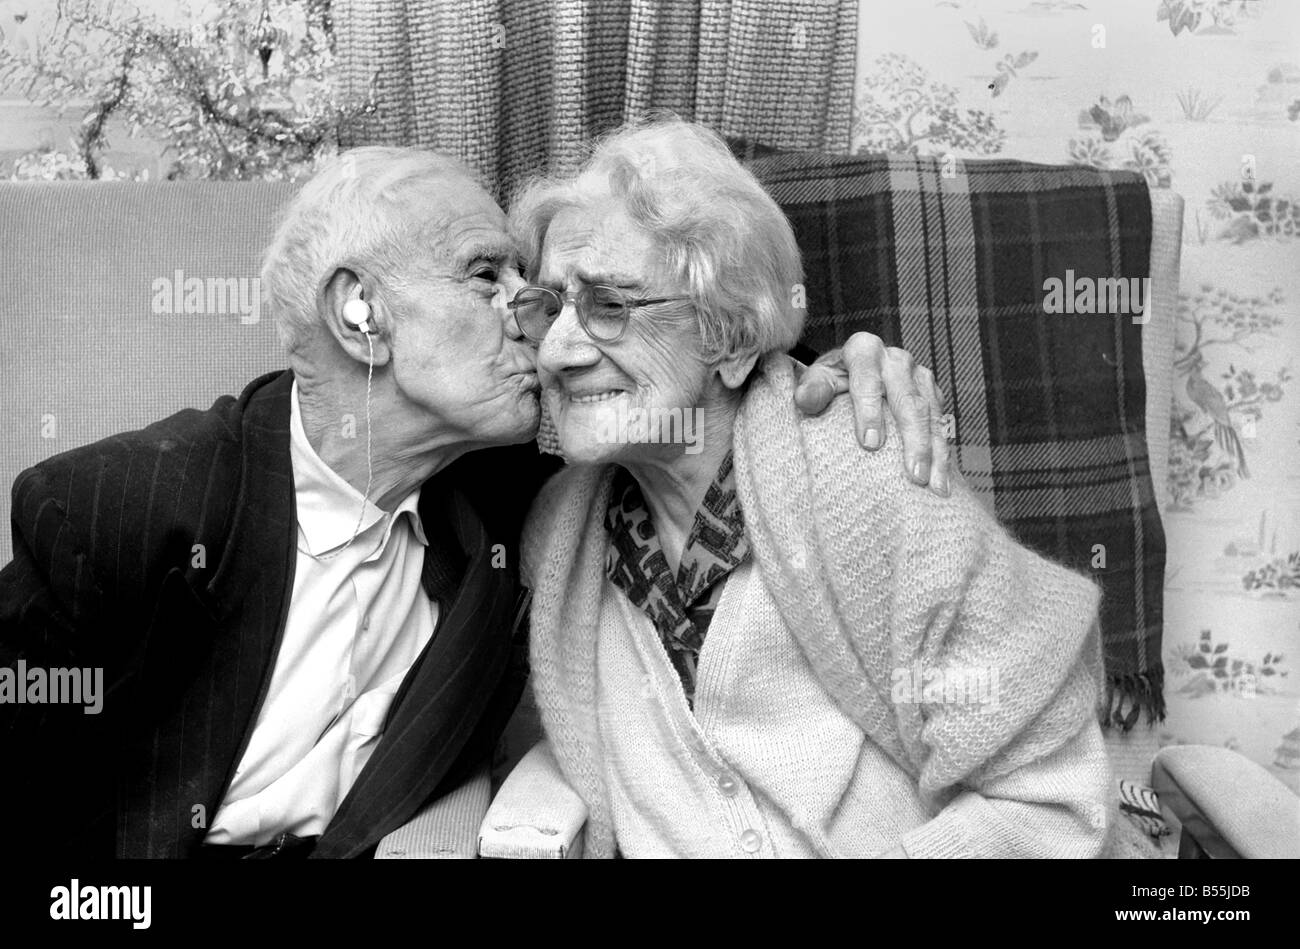 Love and Romance: Elderly Couple. Mr. David Harrington, 99, and his wife, Elizabeth, 100, celebrate their 76th wedding anniversary at the Mayesbrook Old Folks Home, Bevean Ave, Barking, on Christmas Day. December 1969 Z12290-003 Stock Photo